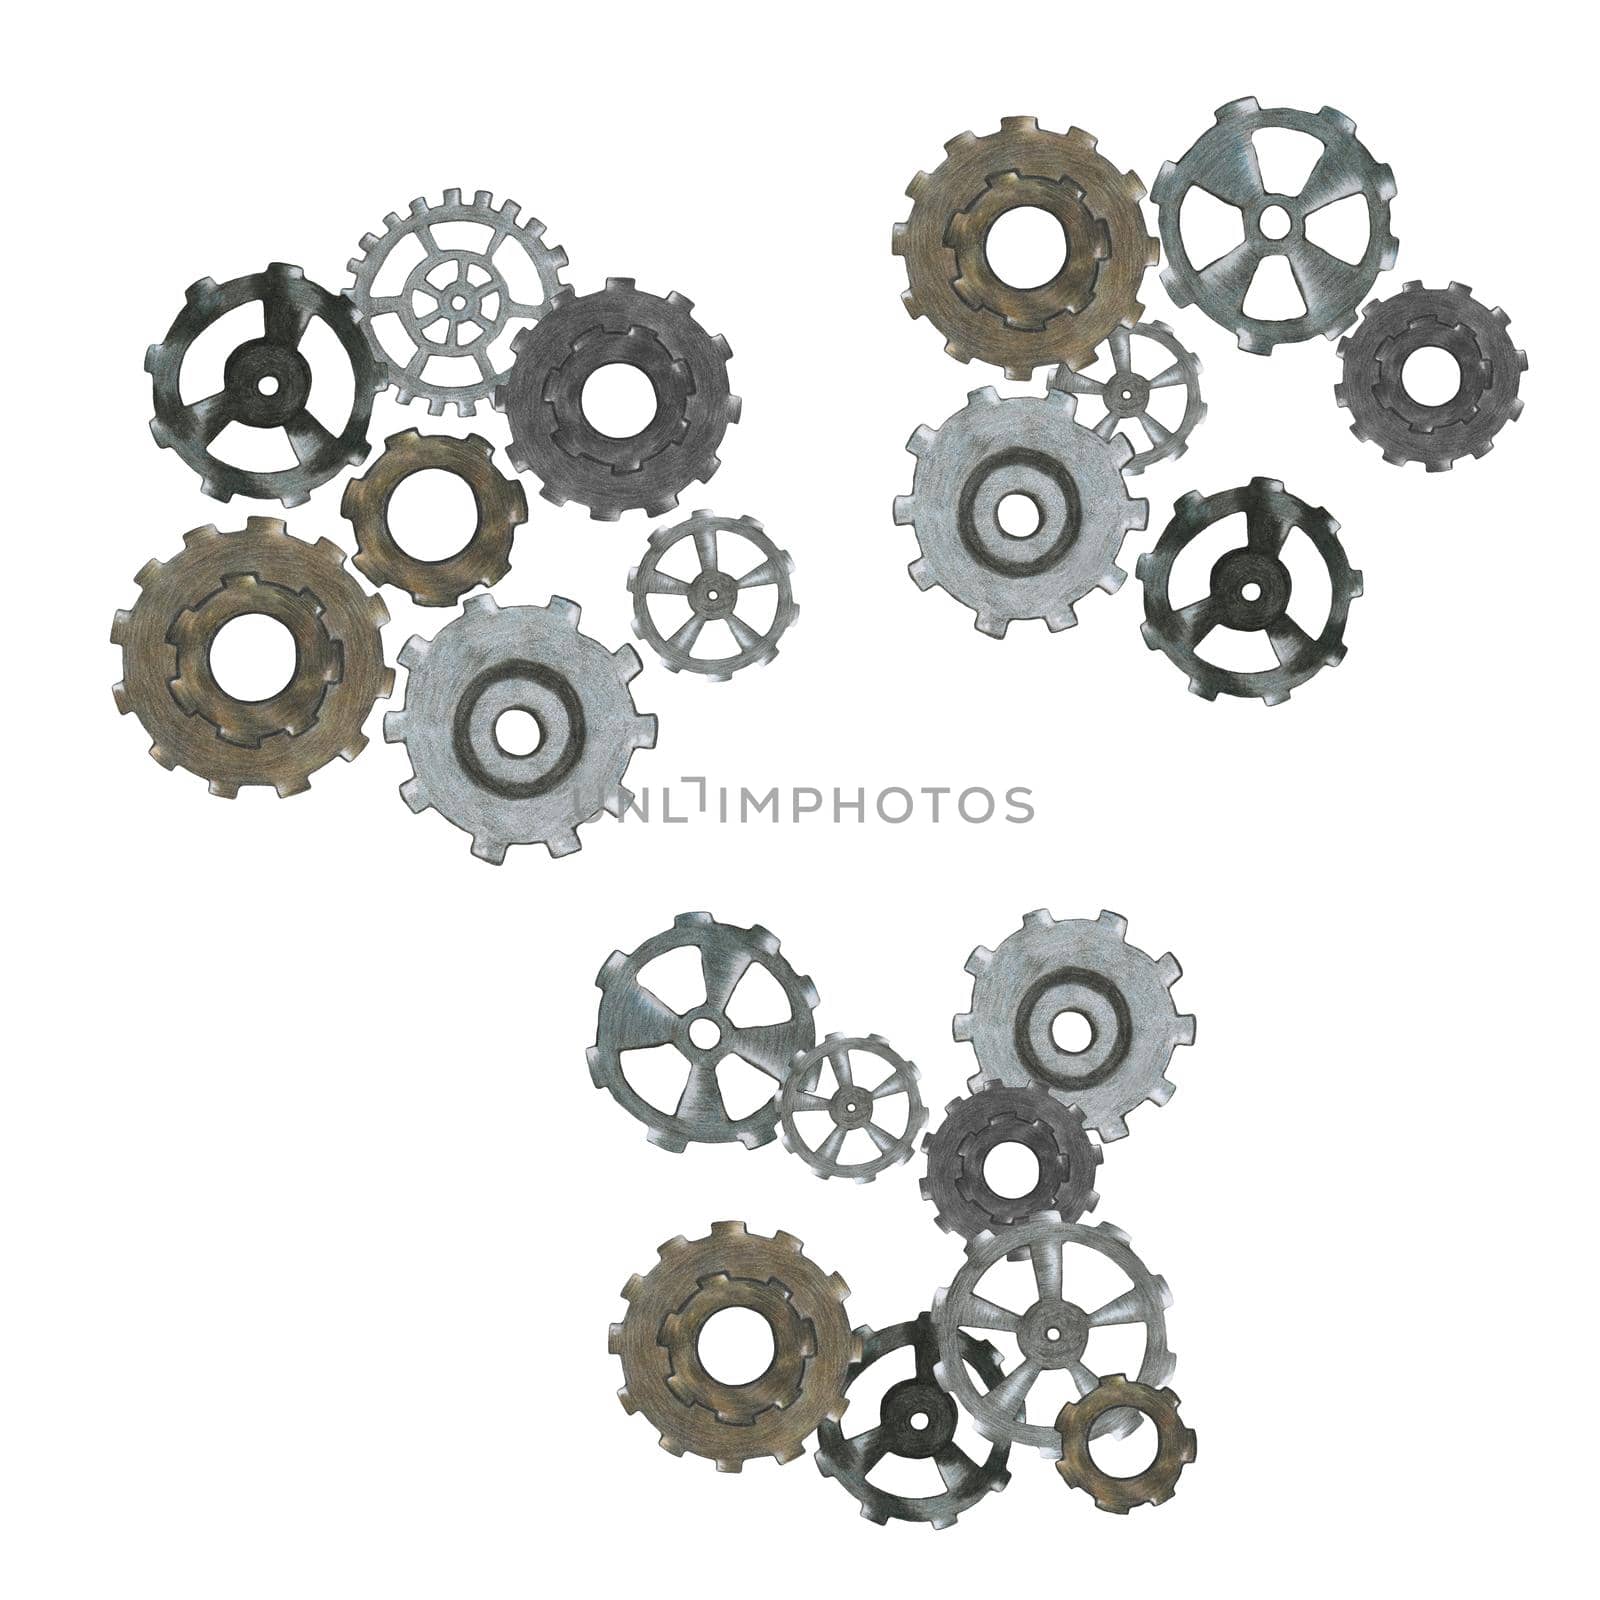 Set of Grey and Brown Gear Composition Isolated on White Background. Collection of Steampunk Gears in Motion.